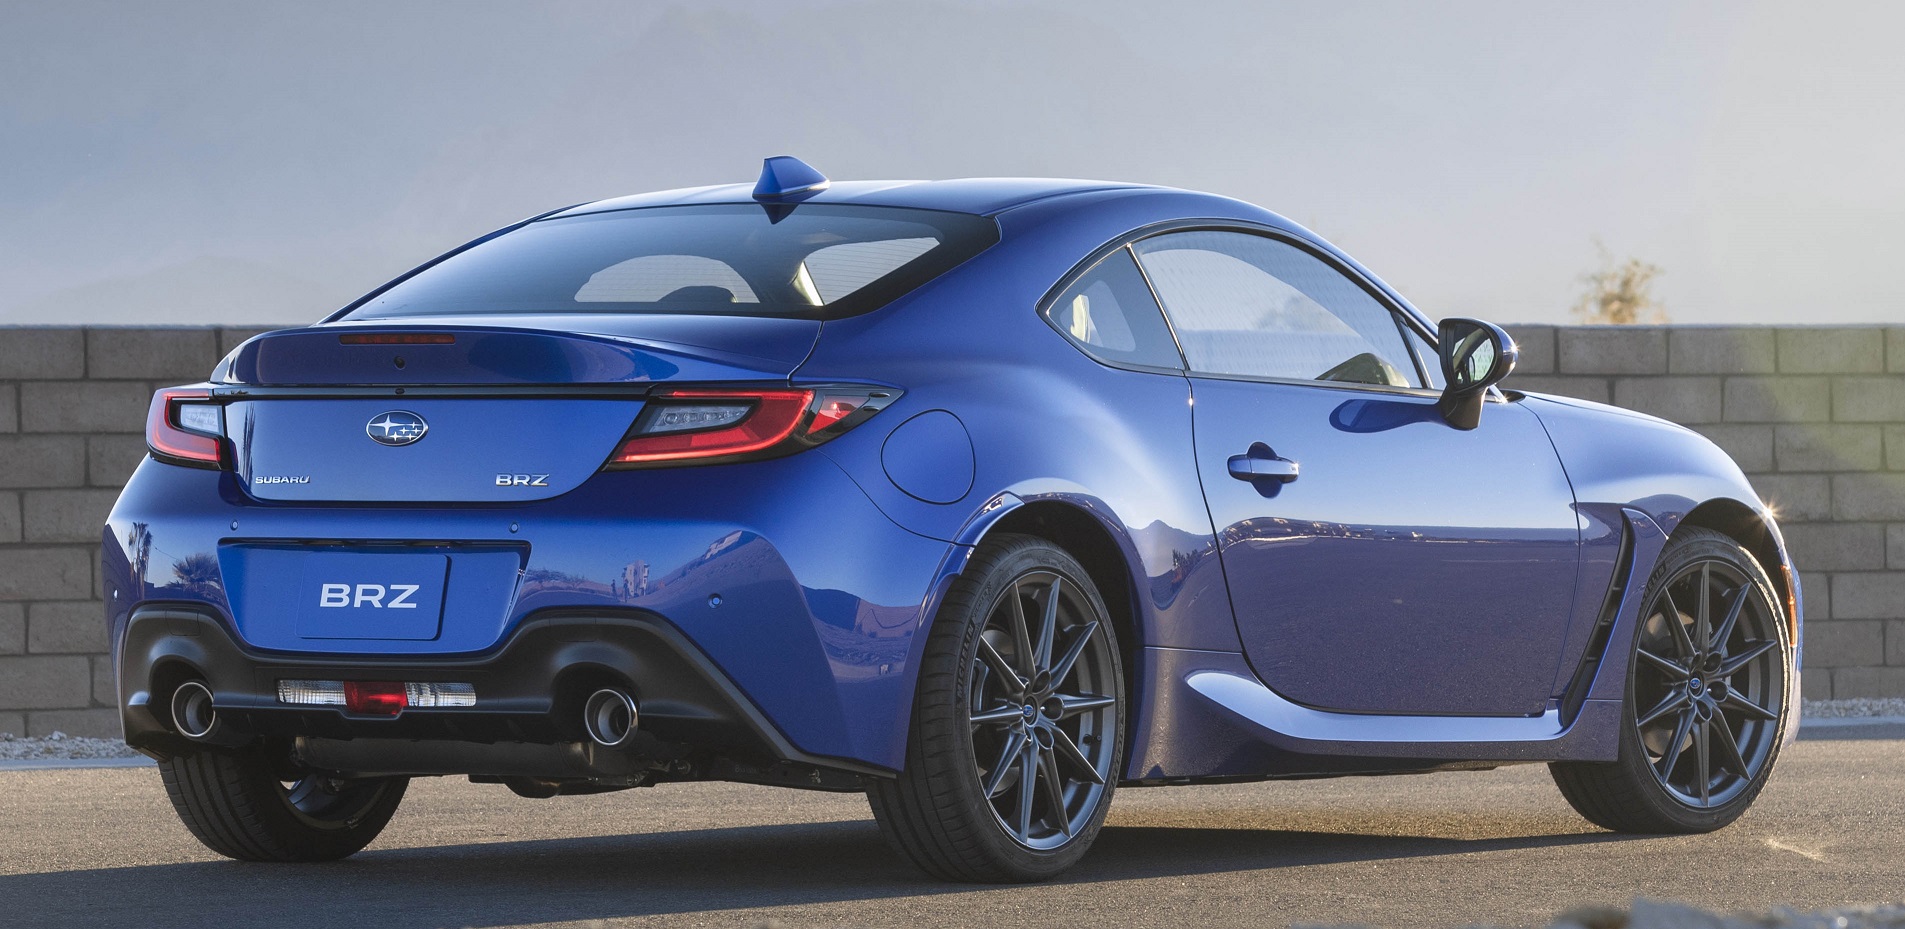 A rear view of a bold, blue BRZ